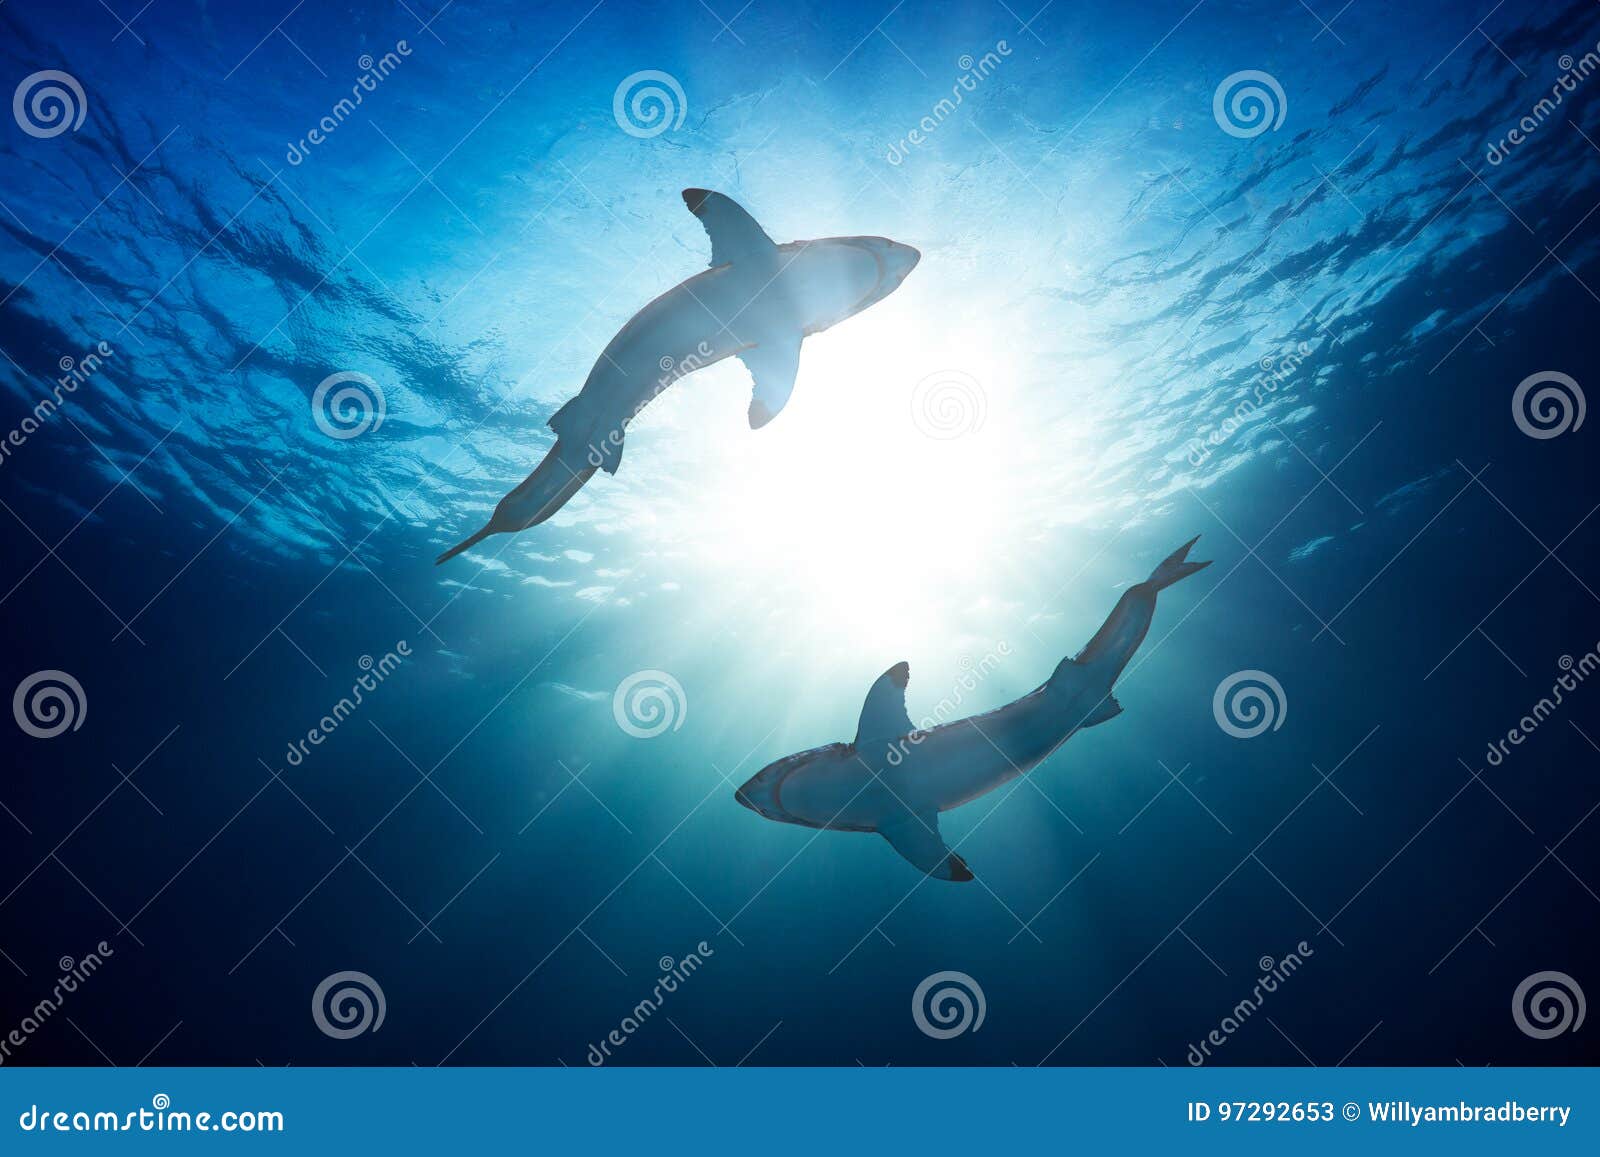 great white sharks against water surface underwater shot